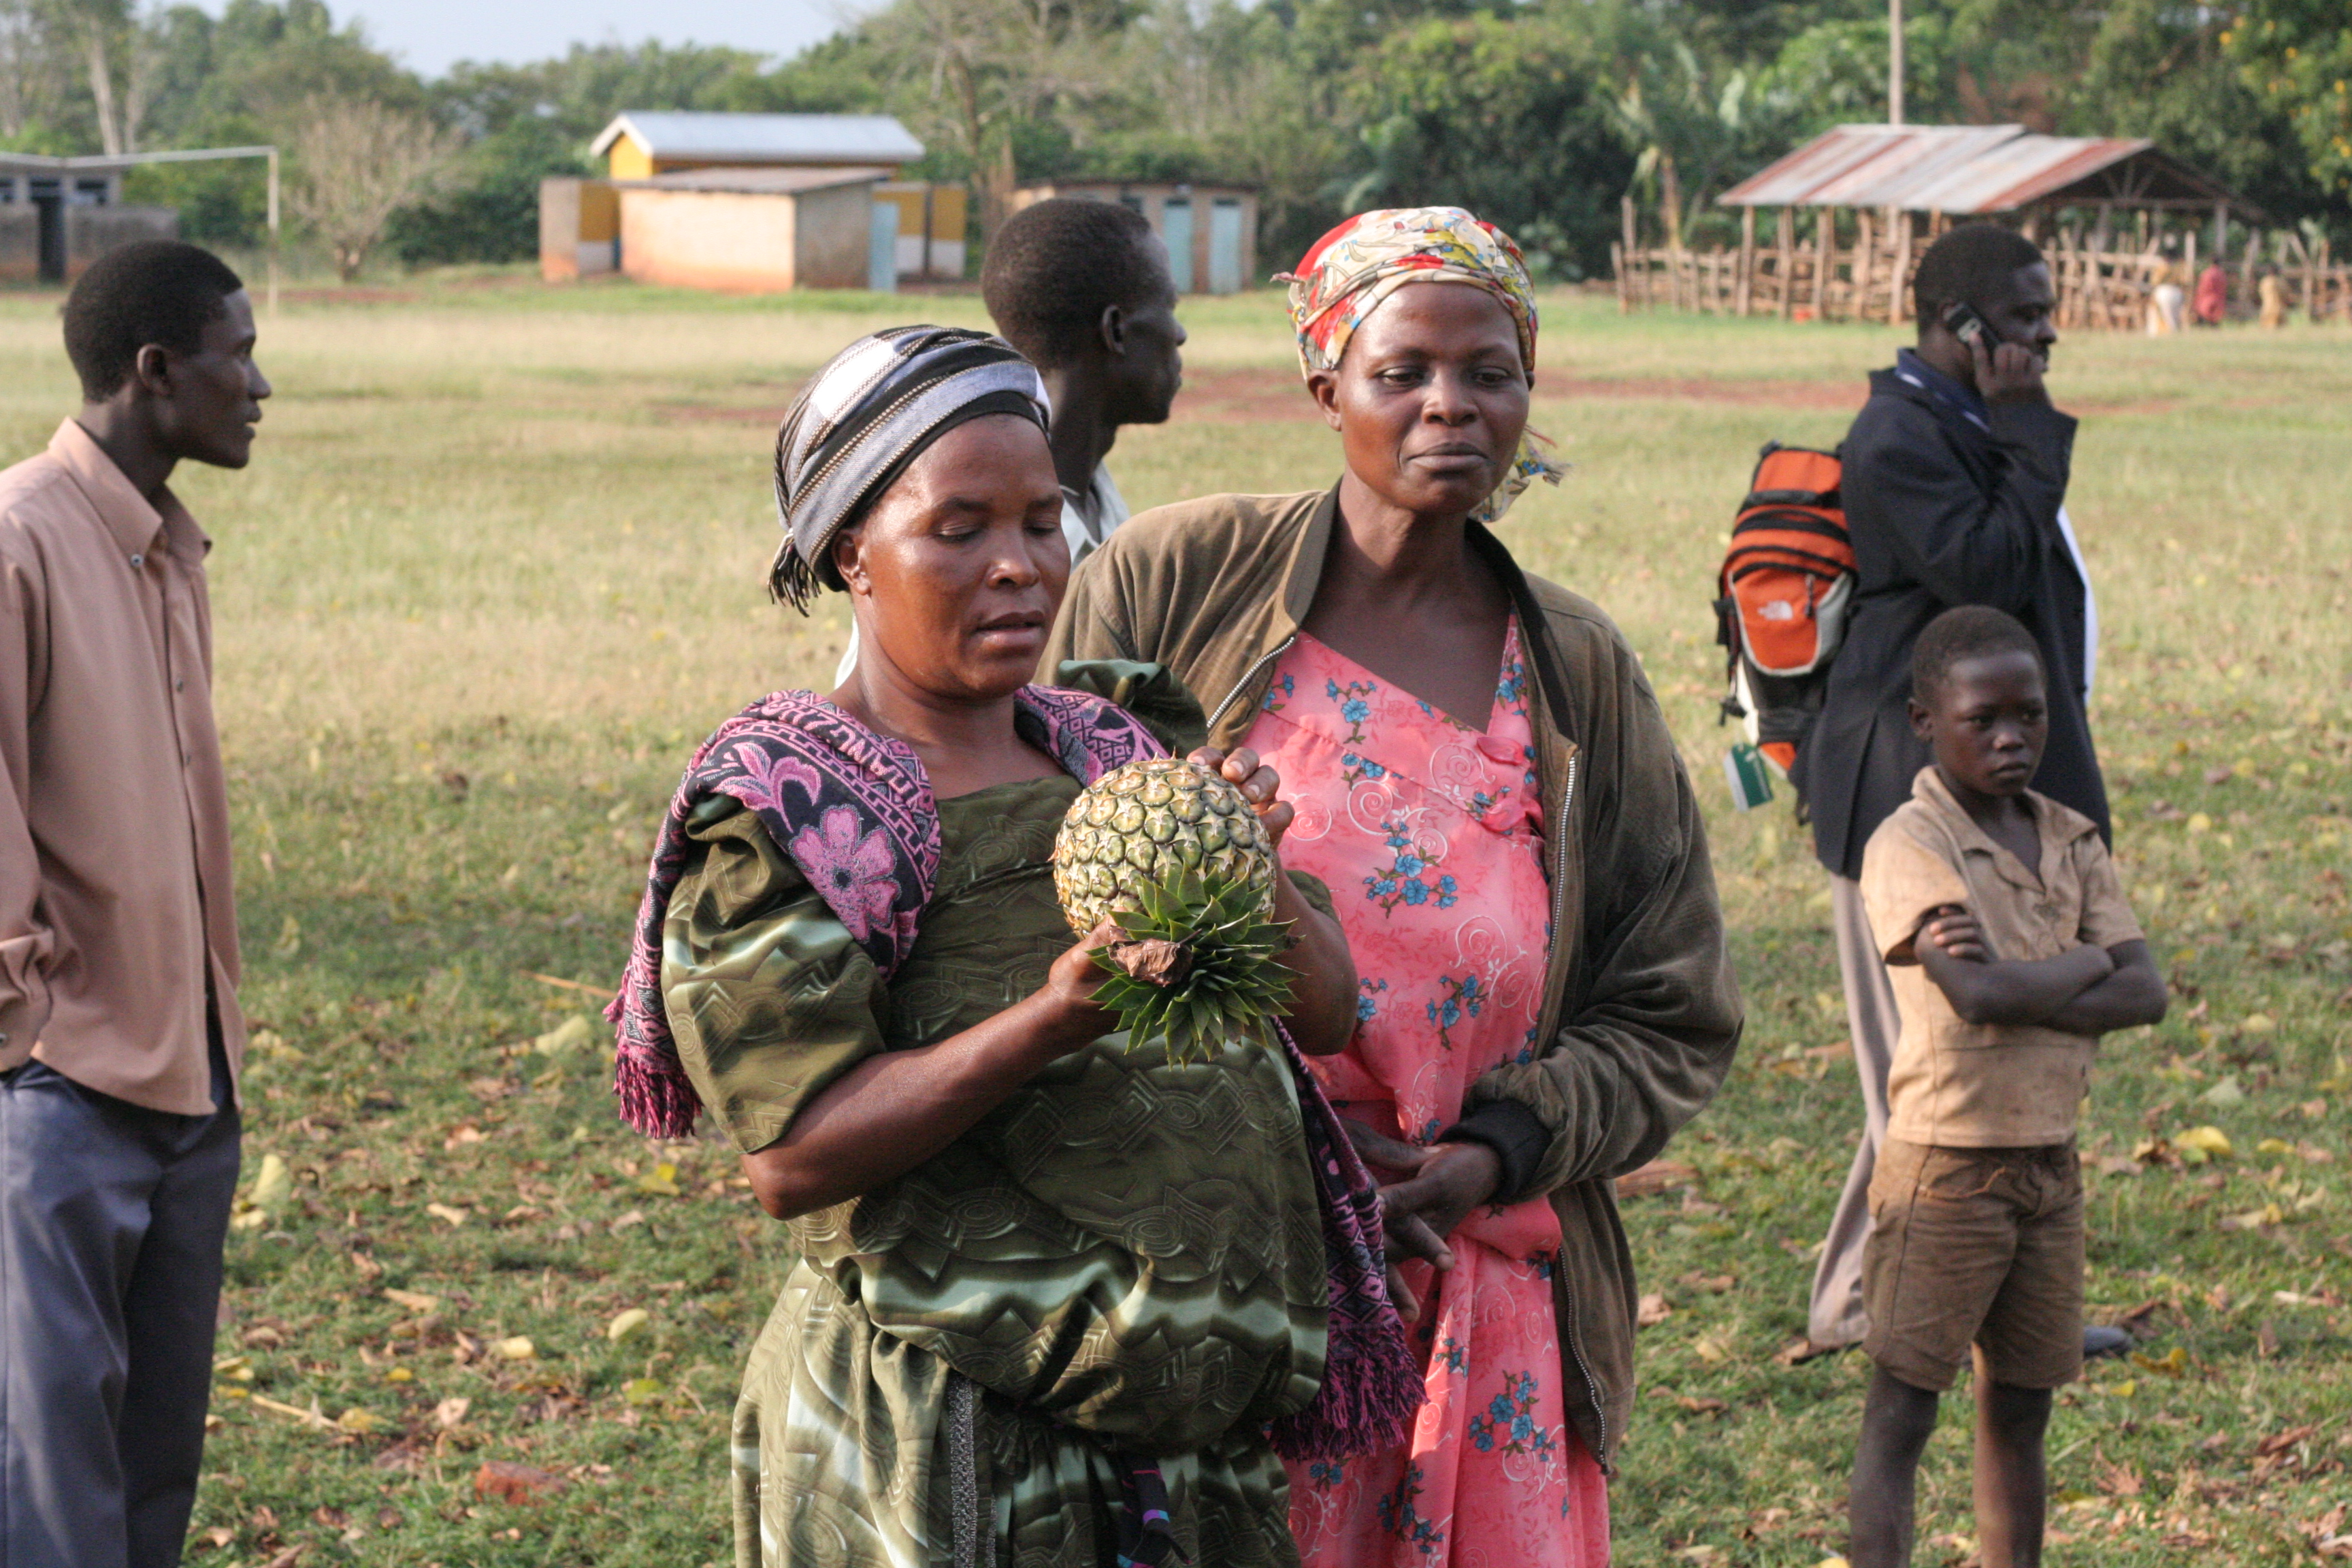 People standing in a field, one with a pineapple